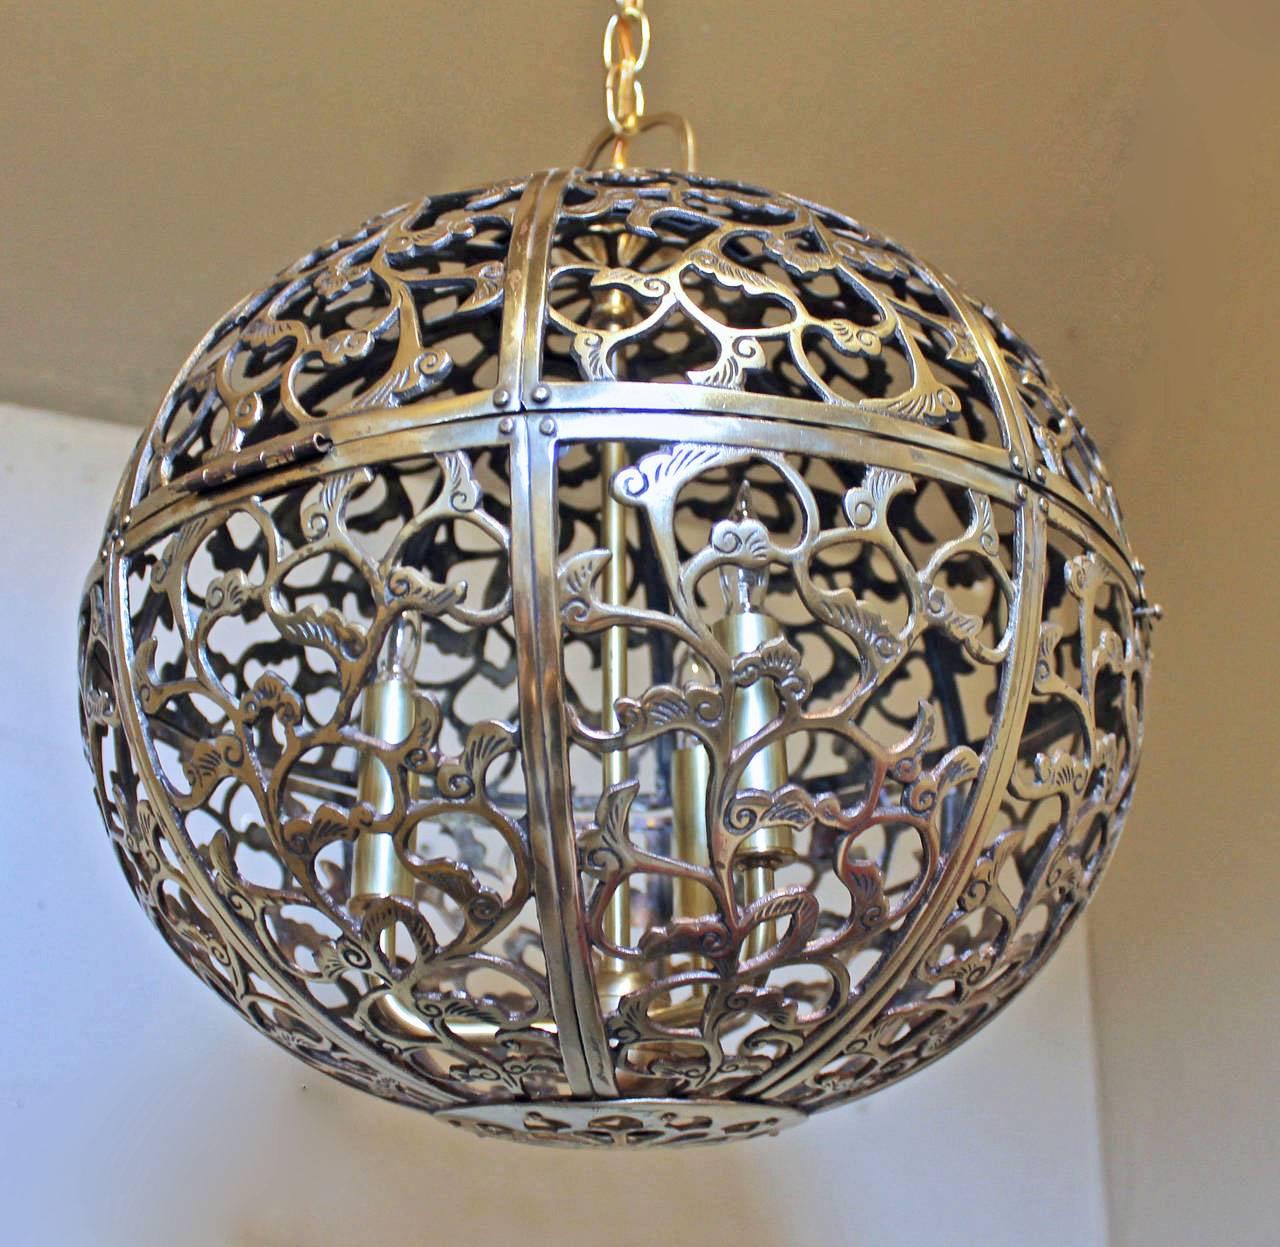 A large high quality heavy pierced brass pendant light with Asian scrollwork pattern. Newly wired with new triple cluster light sockets and solid brass fittings. Includes chain and ceiling cap, ceiling drop can be adjusted as needed. Uses 3- 40 watt